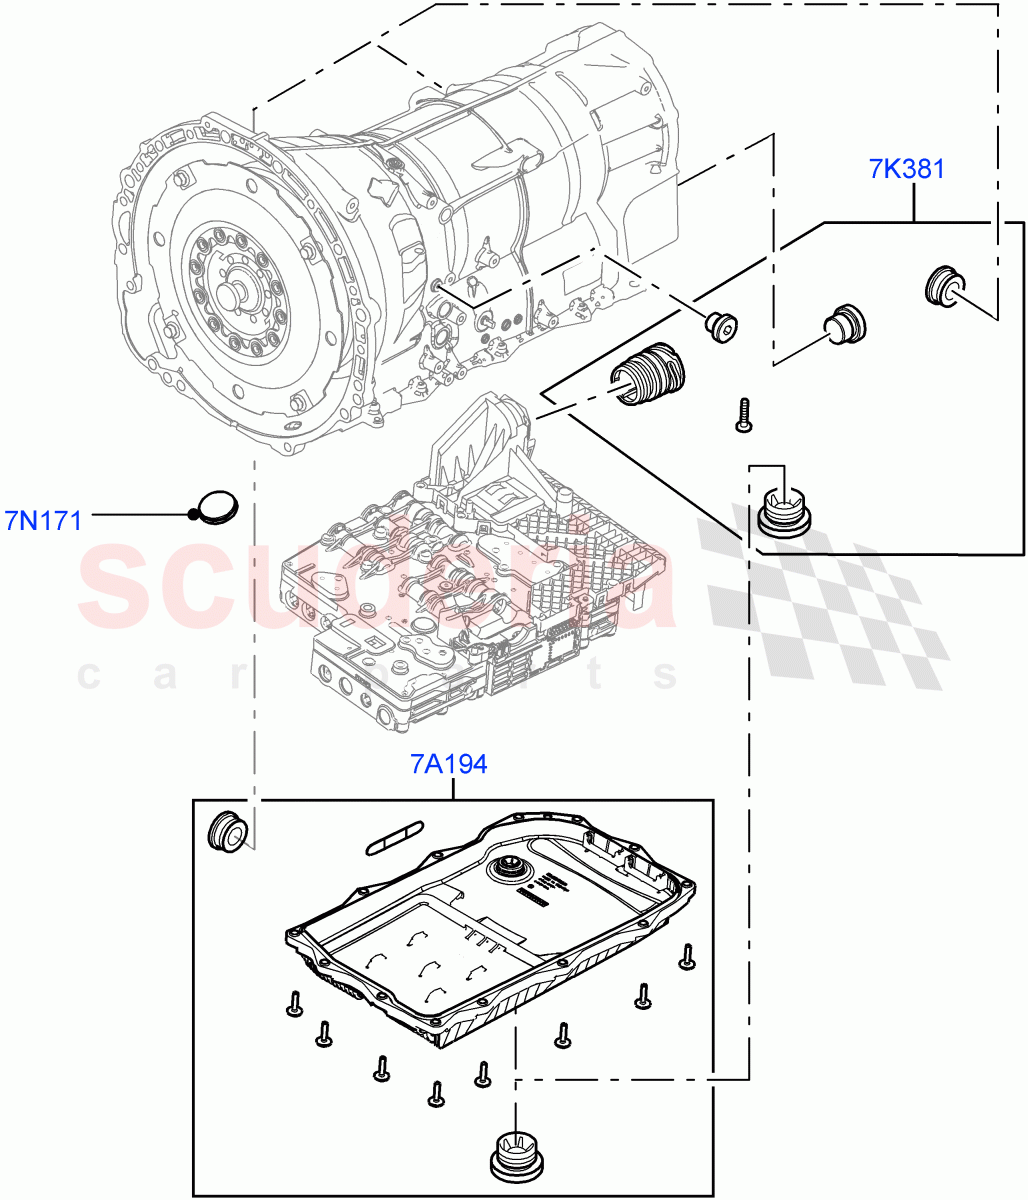 Transmission External Components(Solihull Plant Build)(2.0L I4 DSL HIGH DOHC AJ200,8 Speed Auto Trans ZF 8HP70 4WD)((V)FROMHA000001) of Land Rover Land Rover Discovery 5 (2017+) [3.0 I6 Turbo Diesel AJ20D6]